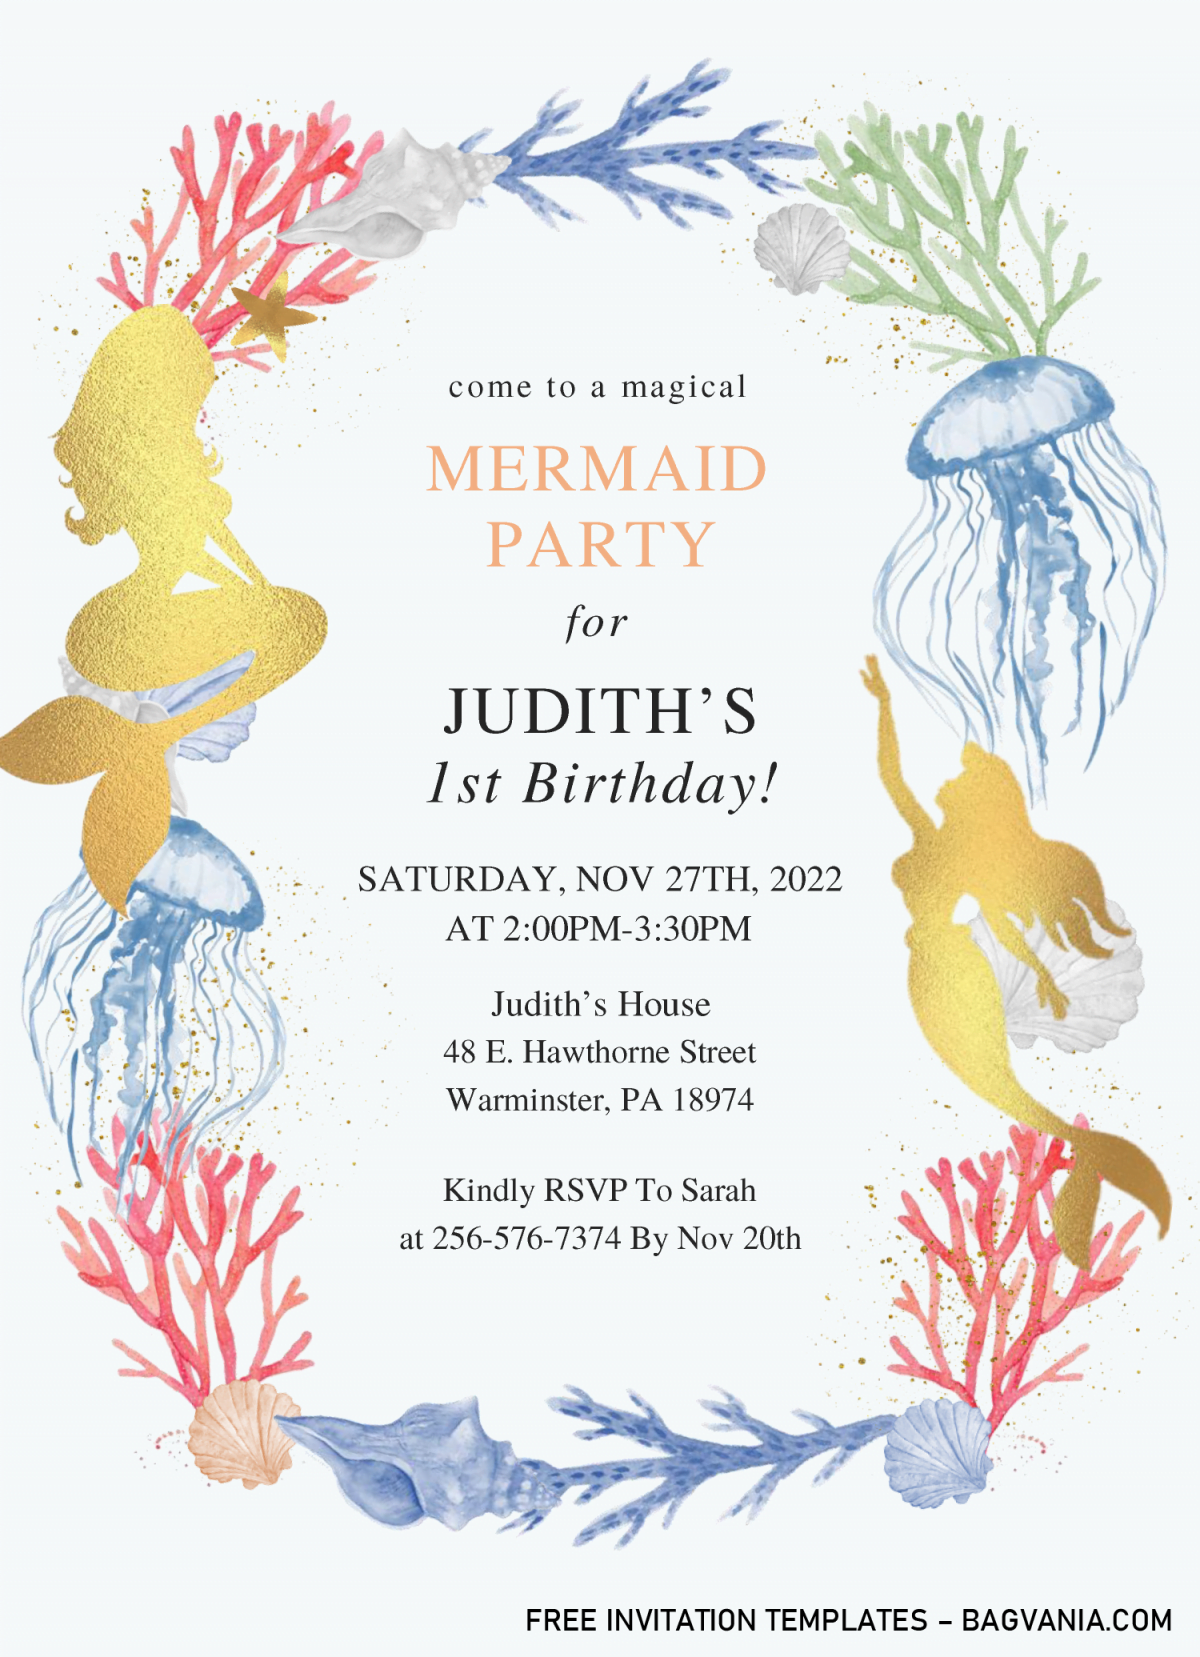 Mermaid Party Invitation Templates - Editable With Microsoft Word and has jellyfish and seashell